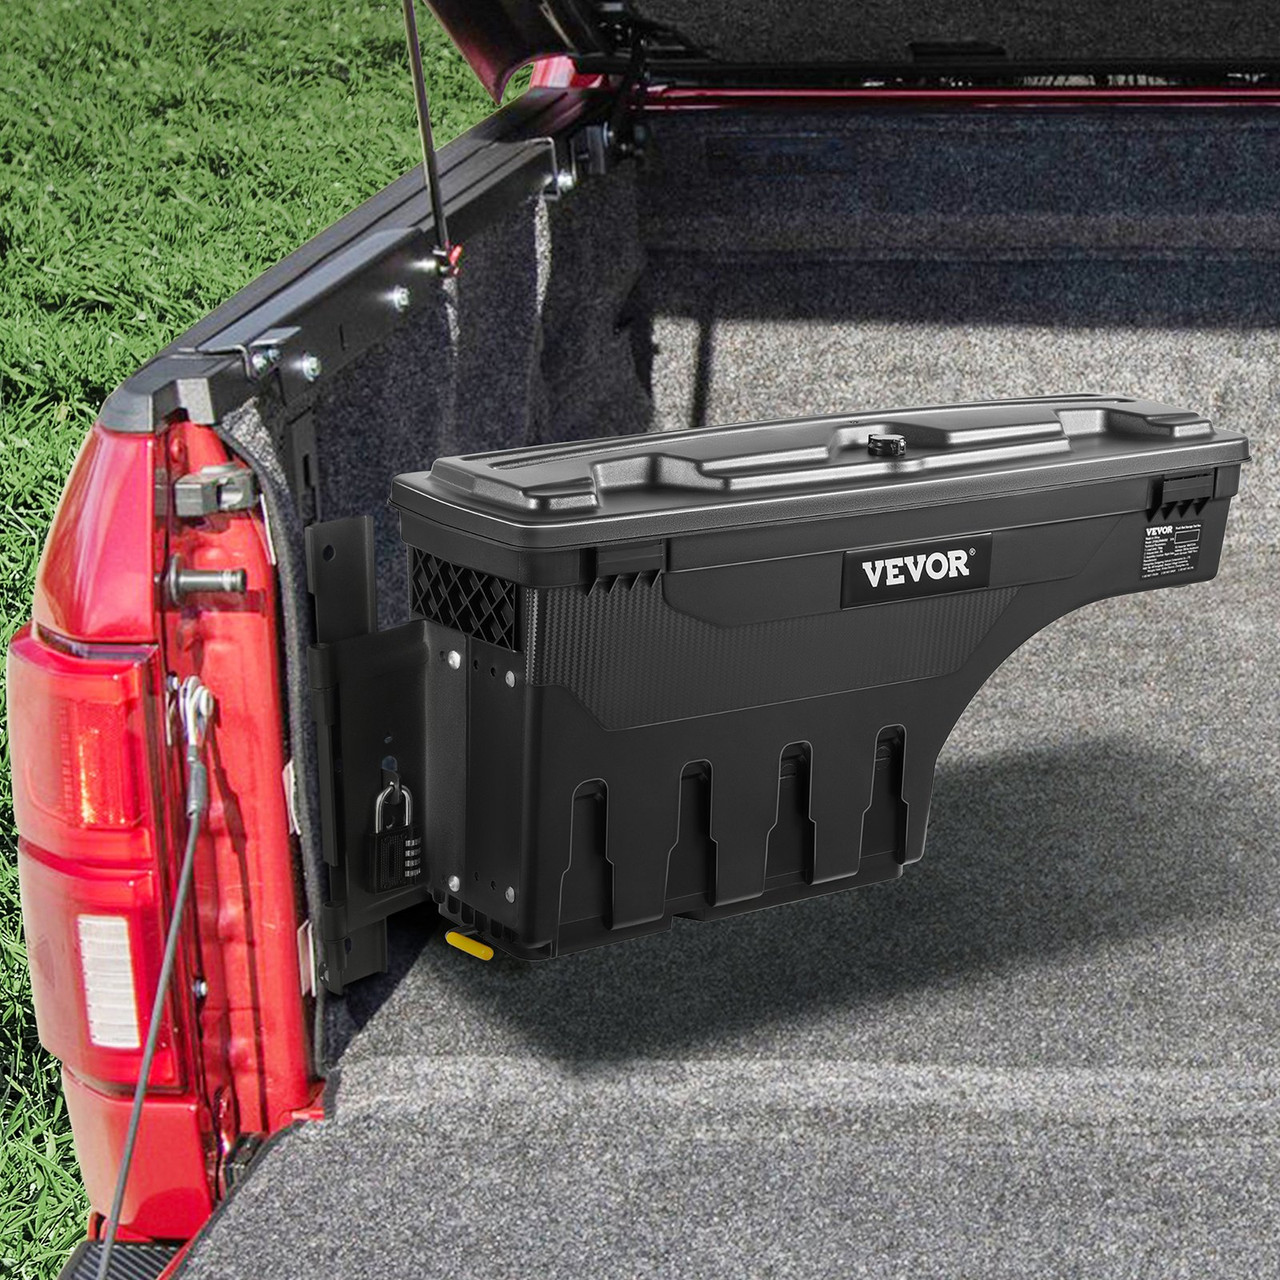 VEVOR Truck Bed Storage Box, Fits 2015-2020 Ford F150, Driver Side, Lockable Lid, Waterproof PA6 Wheel Well Tool Box 6.6 Gal/25 L with Password Padlock, Black